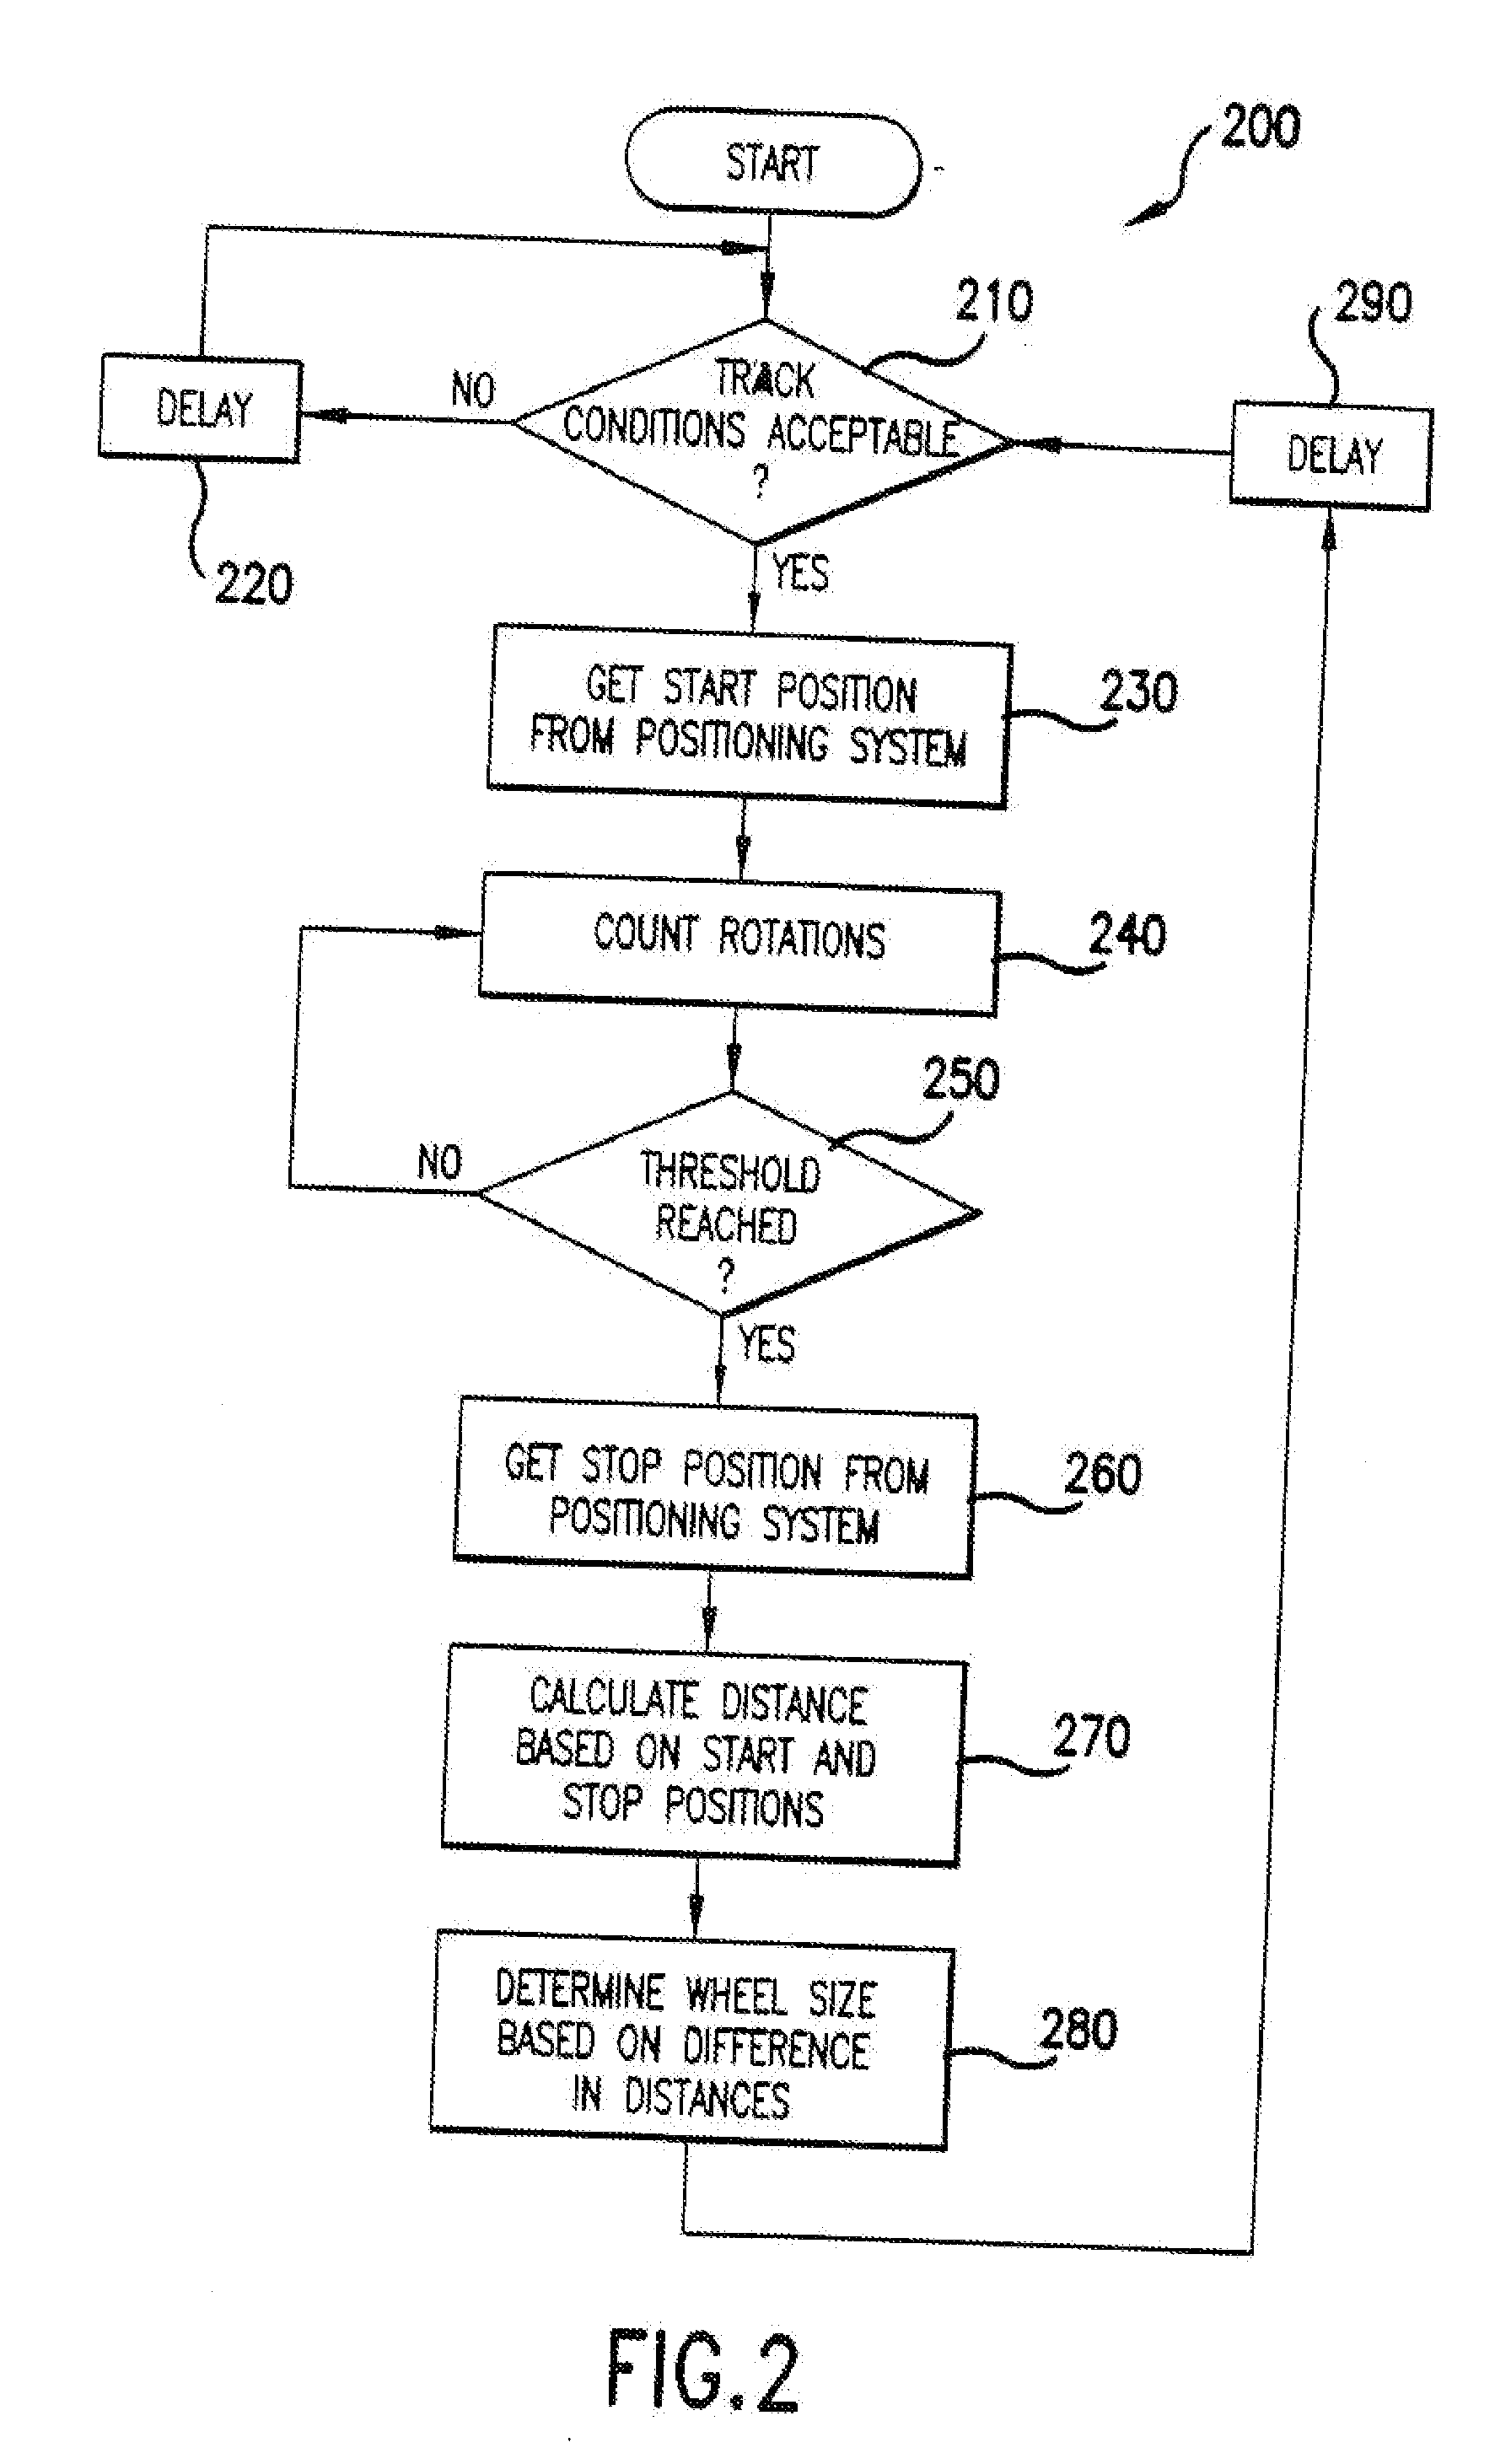 Method and System for Compensating for Wheel Wear on a Train